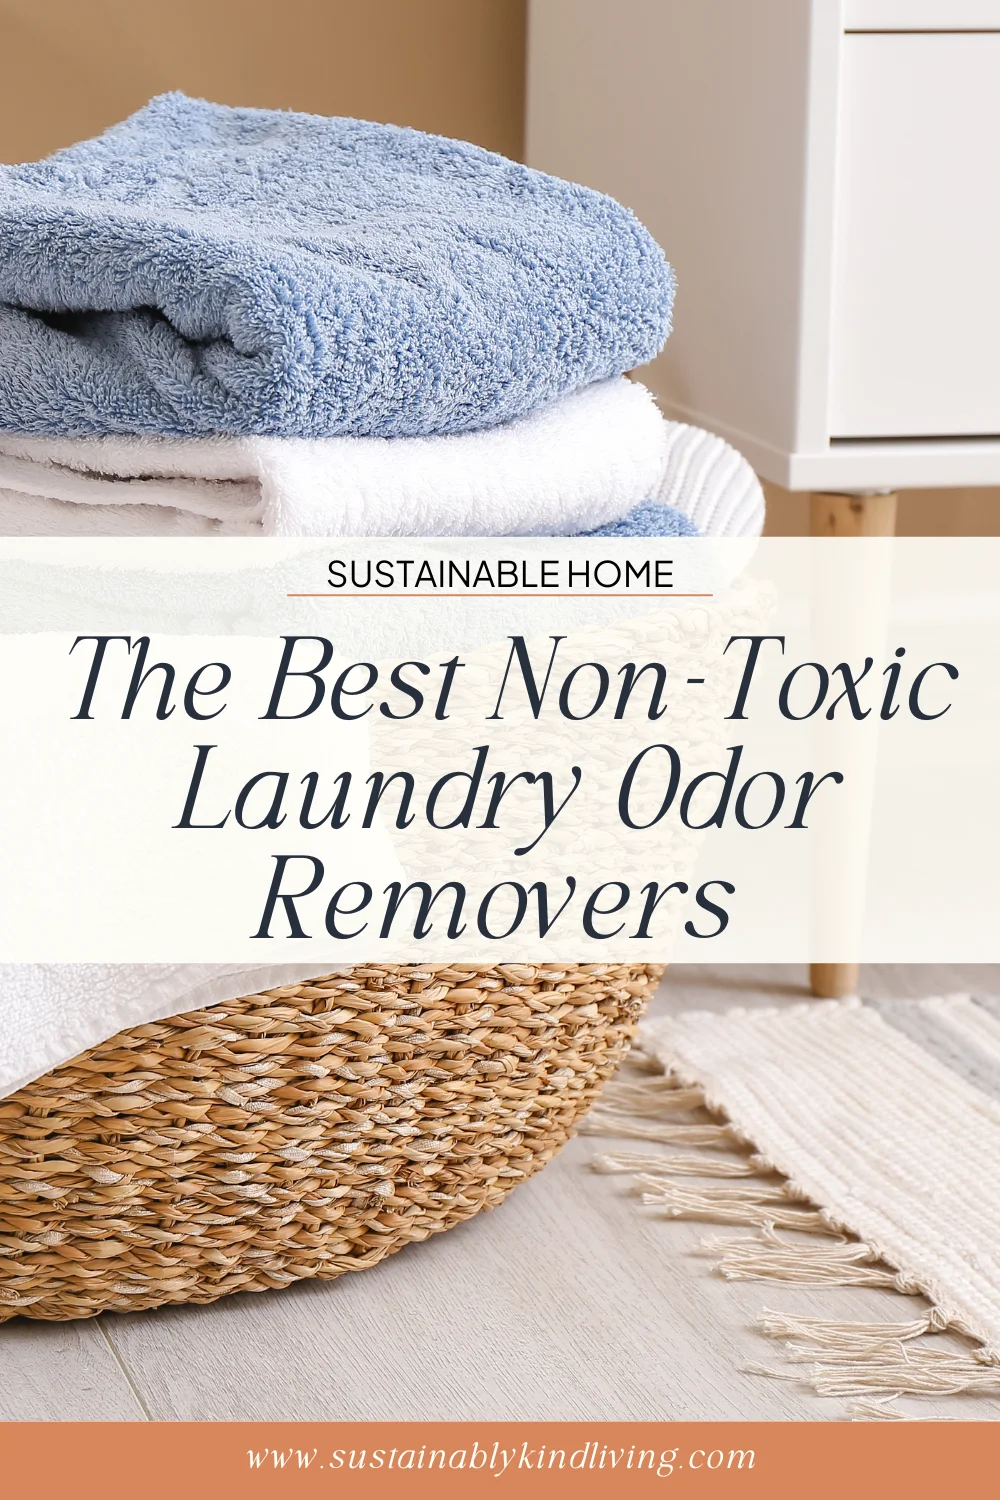 laundry odor removers natural